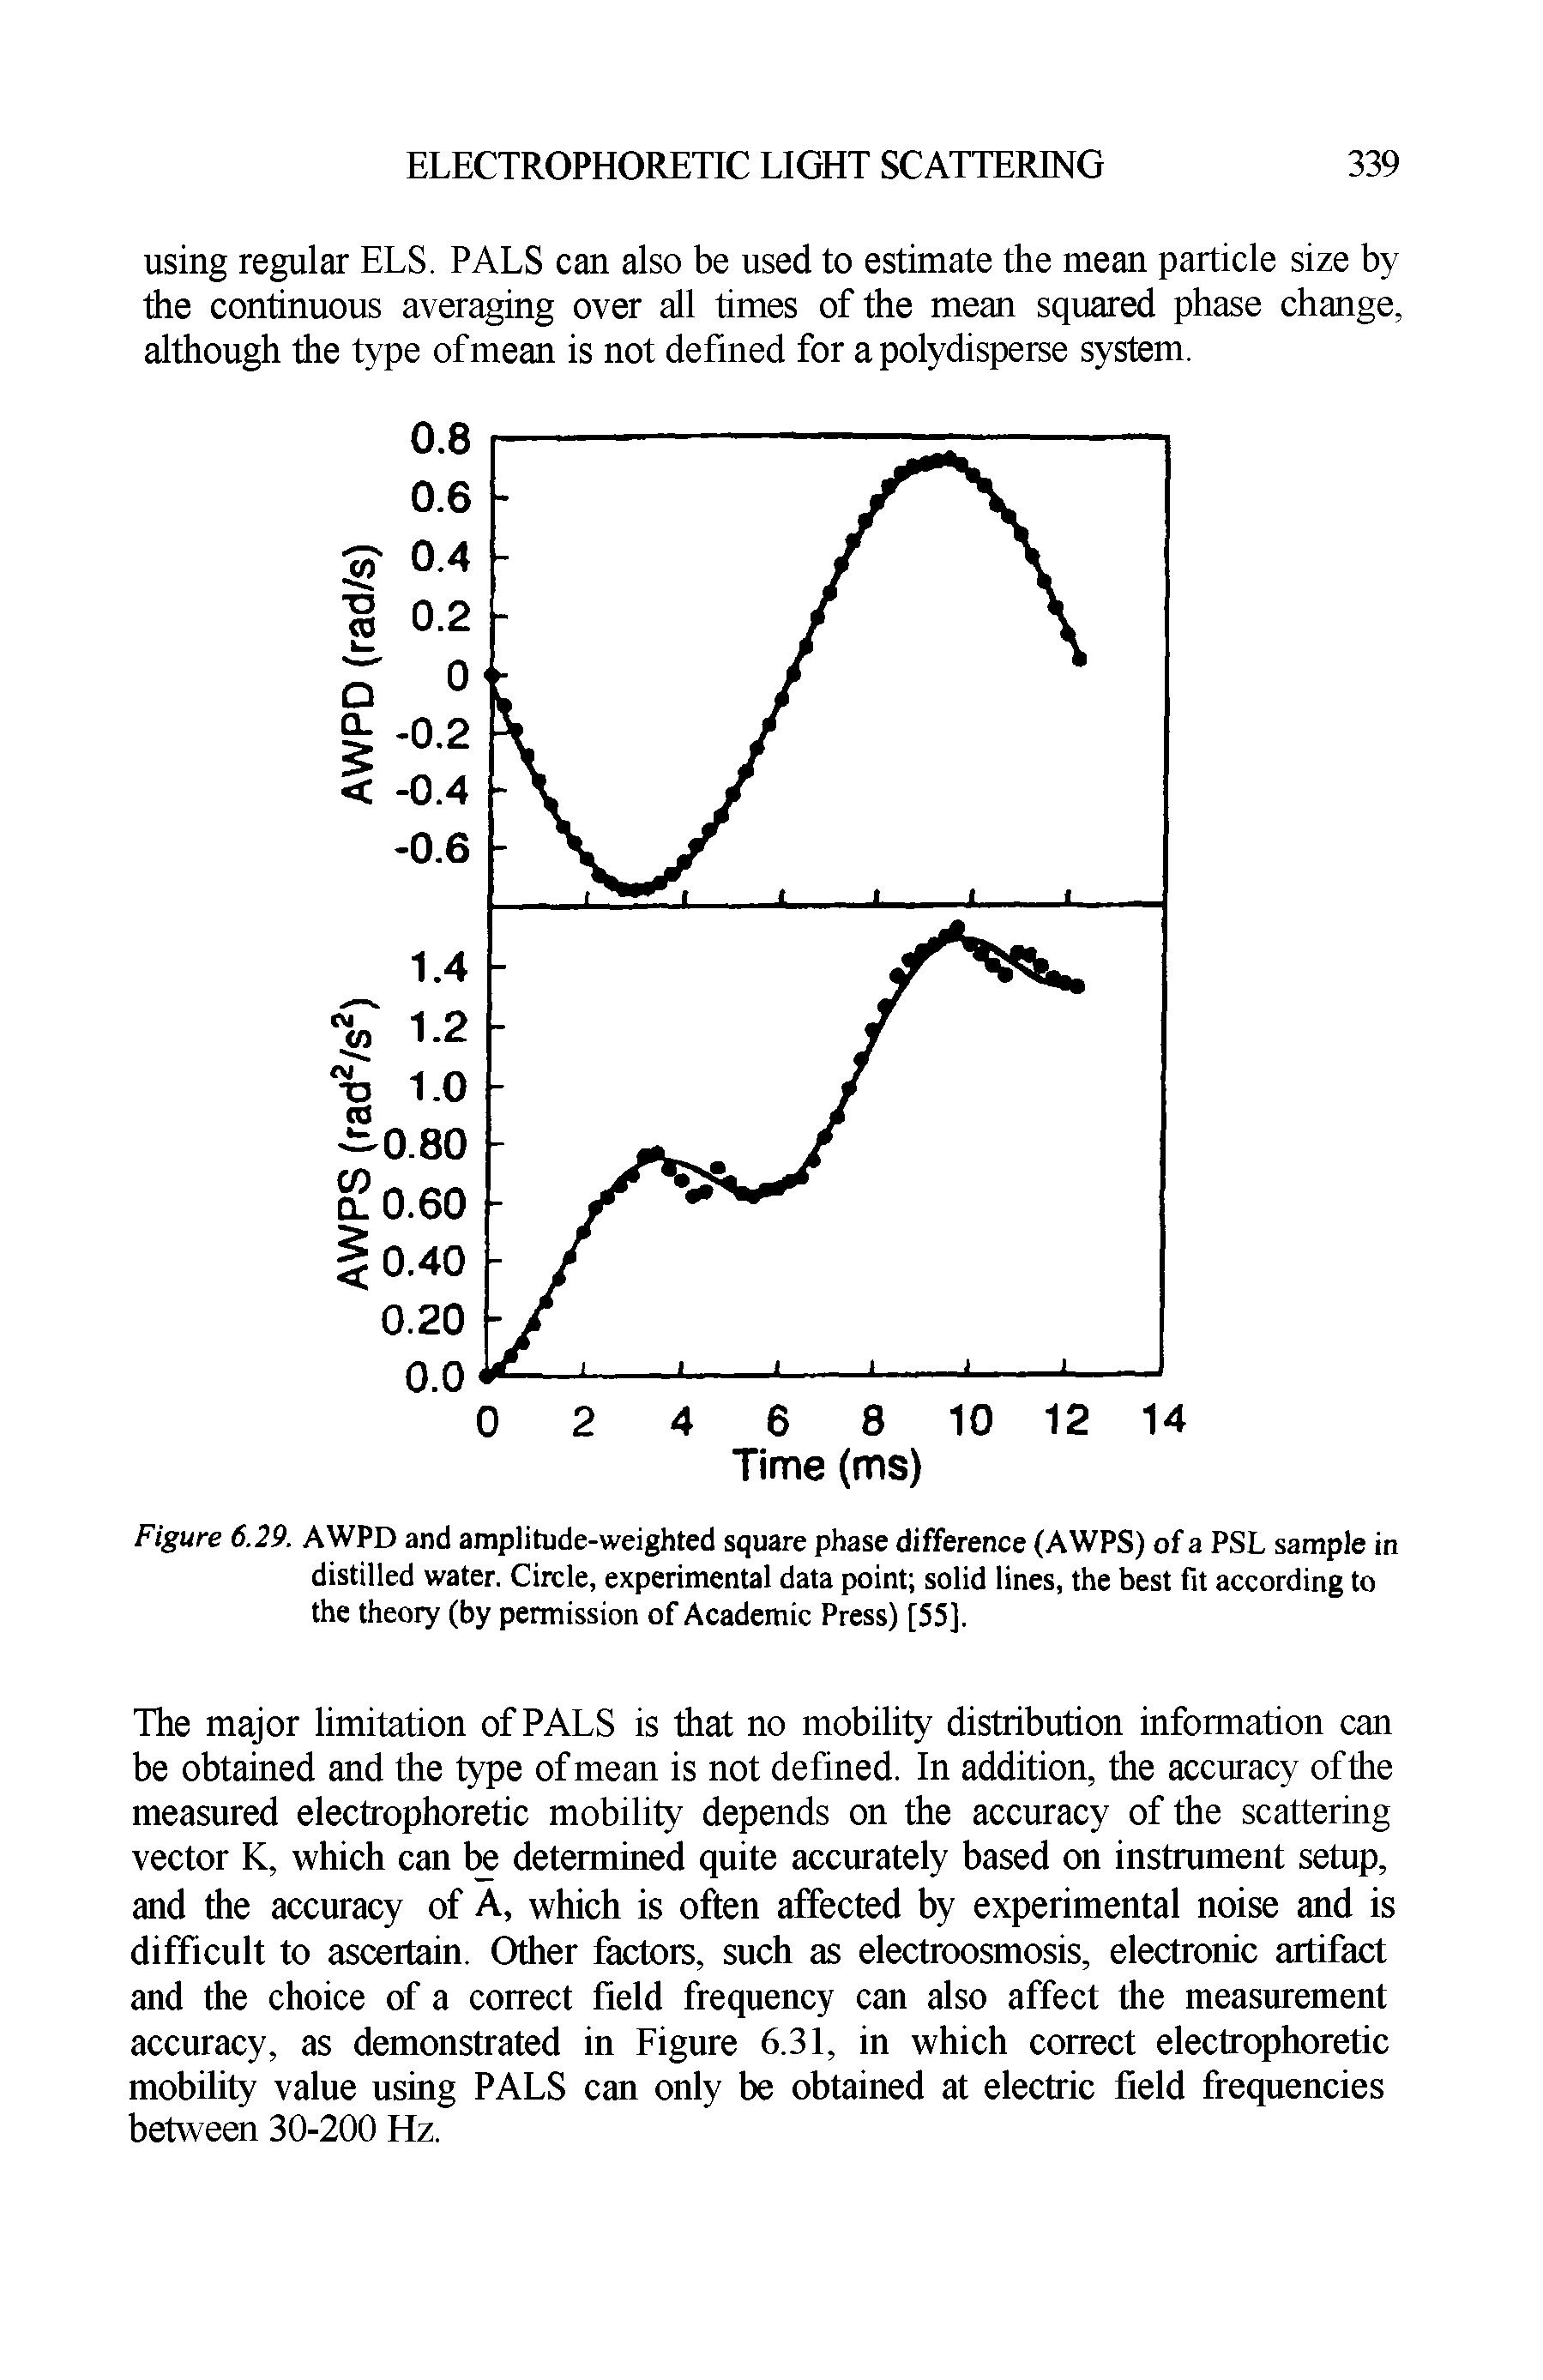 Figure 6.29. AWPD and amplitude-weighted square phase difference (A WPS) of a PSL sample in distilled water. Circle, experimental data point solid lines, the best fit according to the theory (by permission of Academic Press) [55].